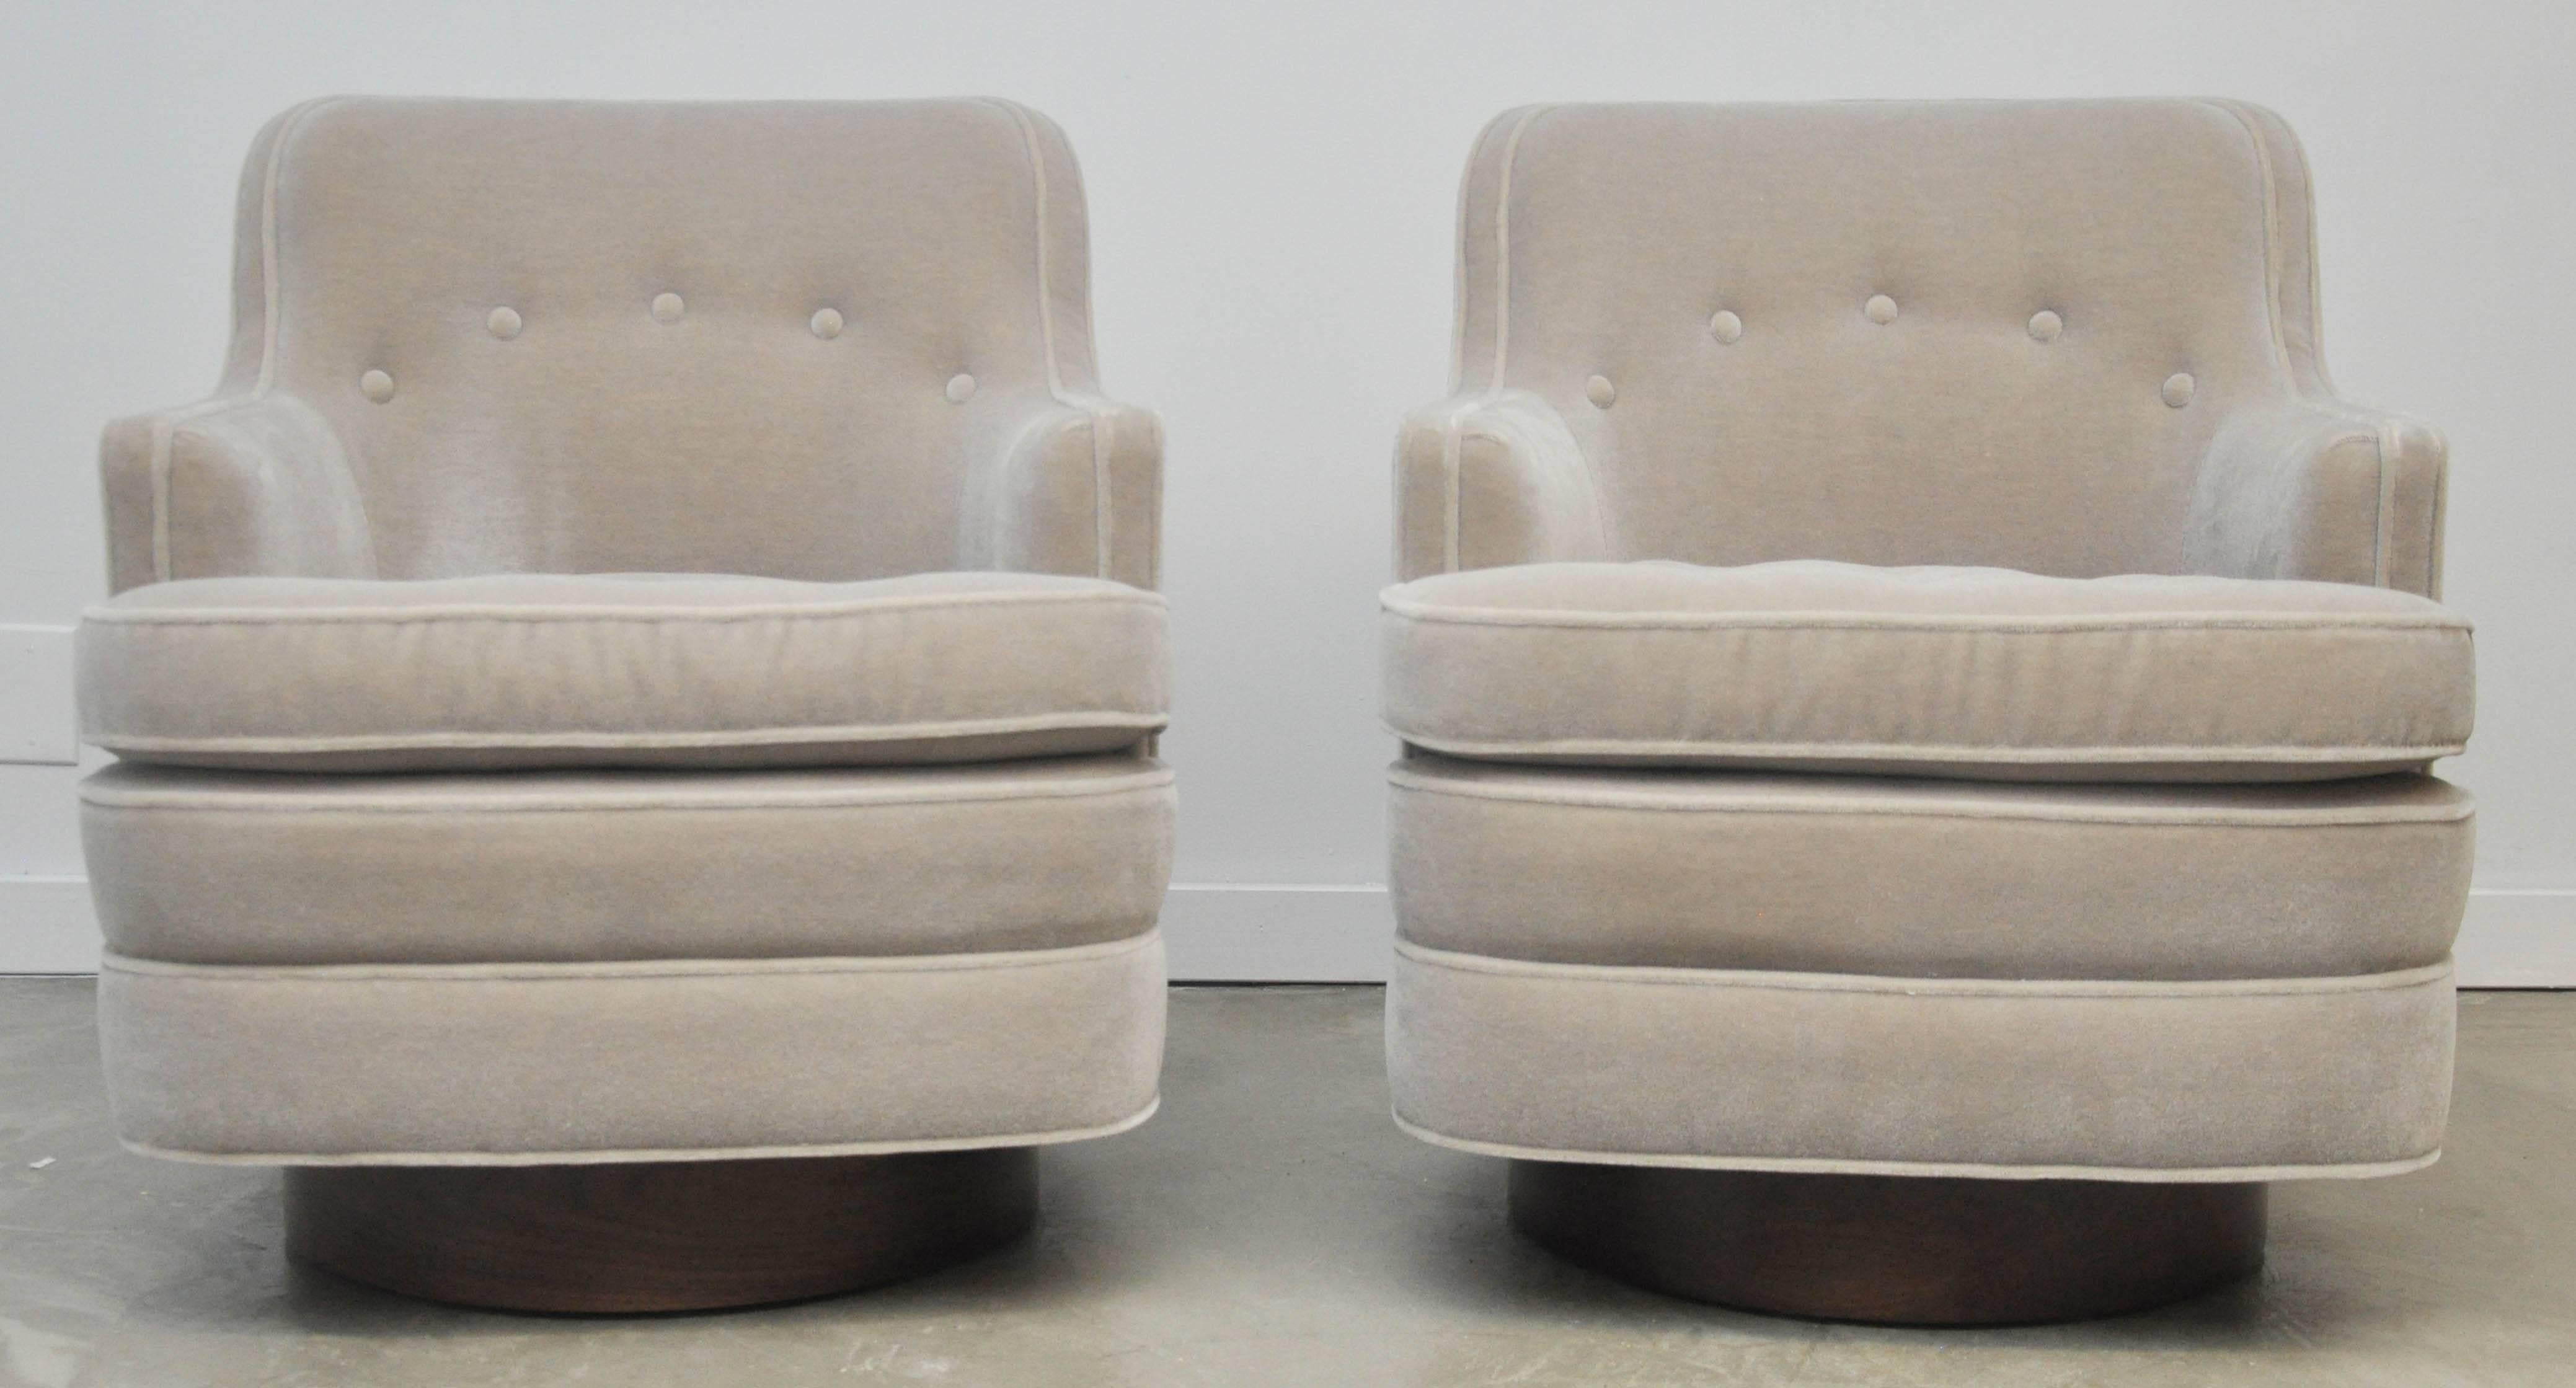 Swivel chairs by Edward Wormley for Dunbar. Fully restored. New mohair upholstery over new walnut swivel bases.